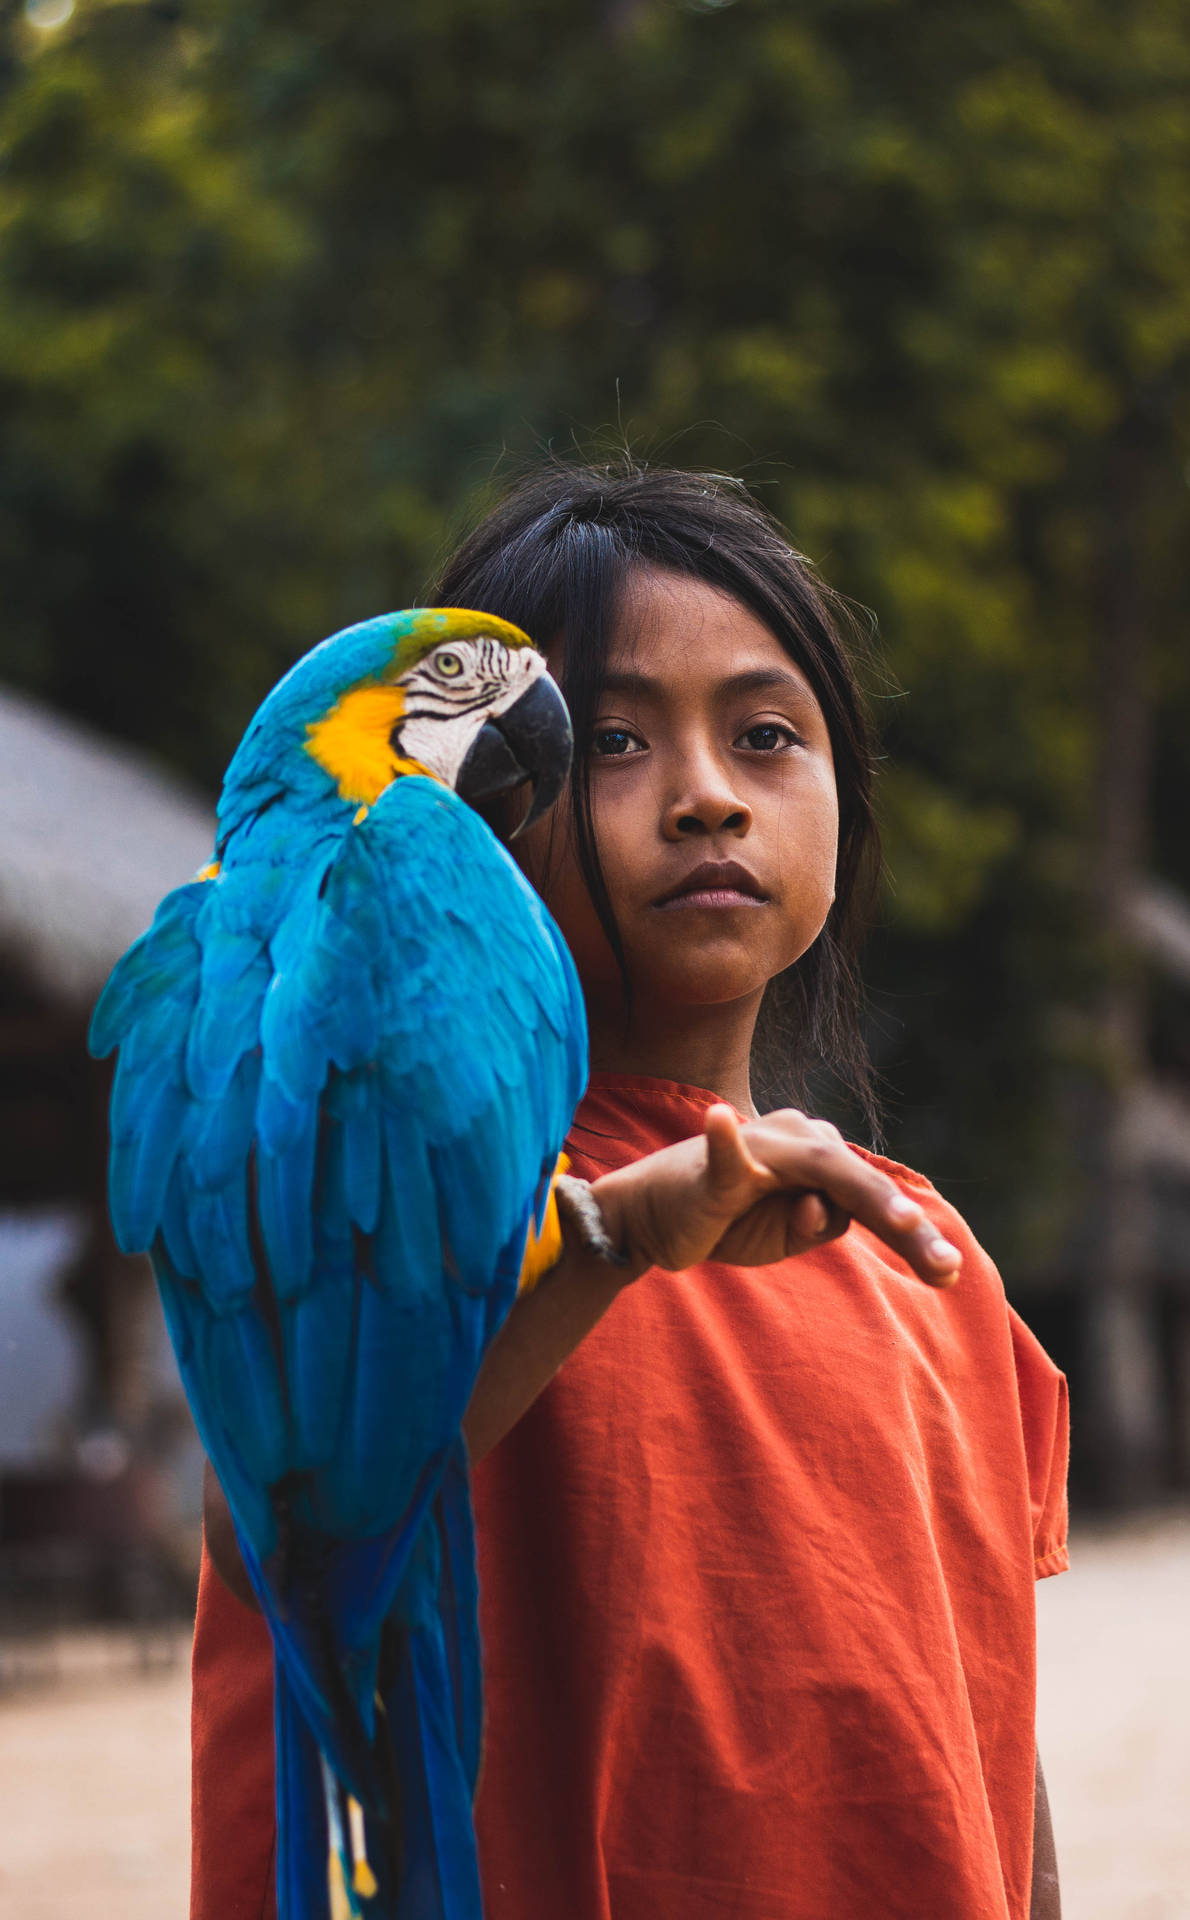 A Young Boy Interacting With A Vibrant Blue Parrot Background